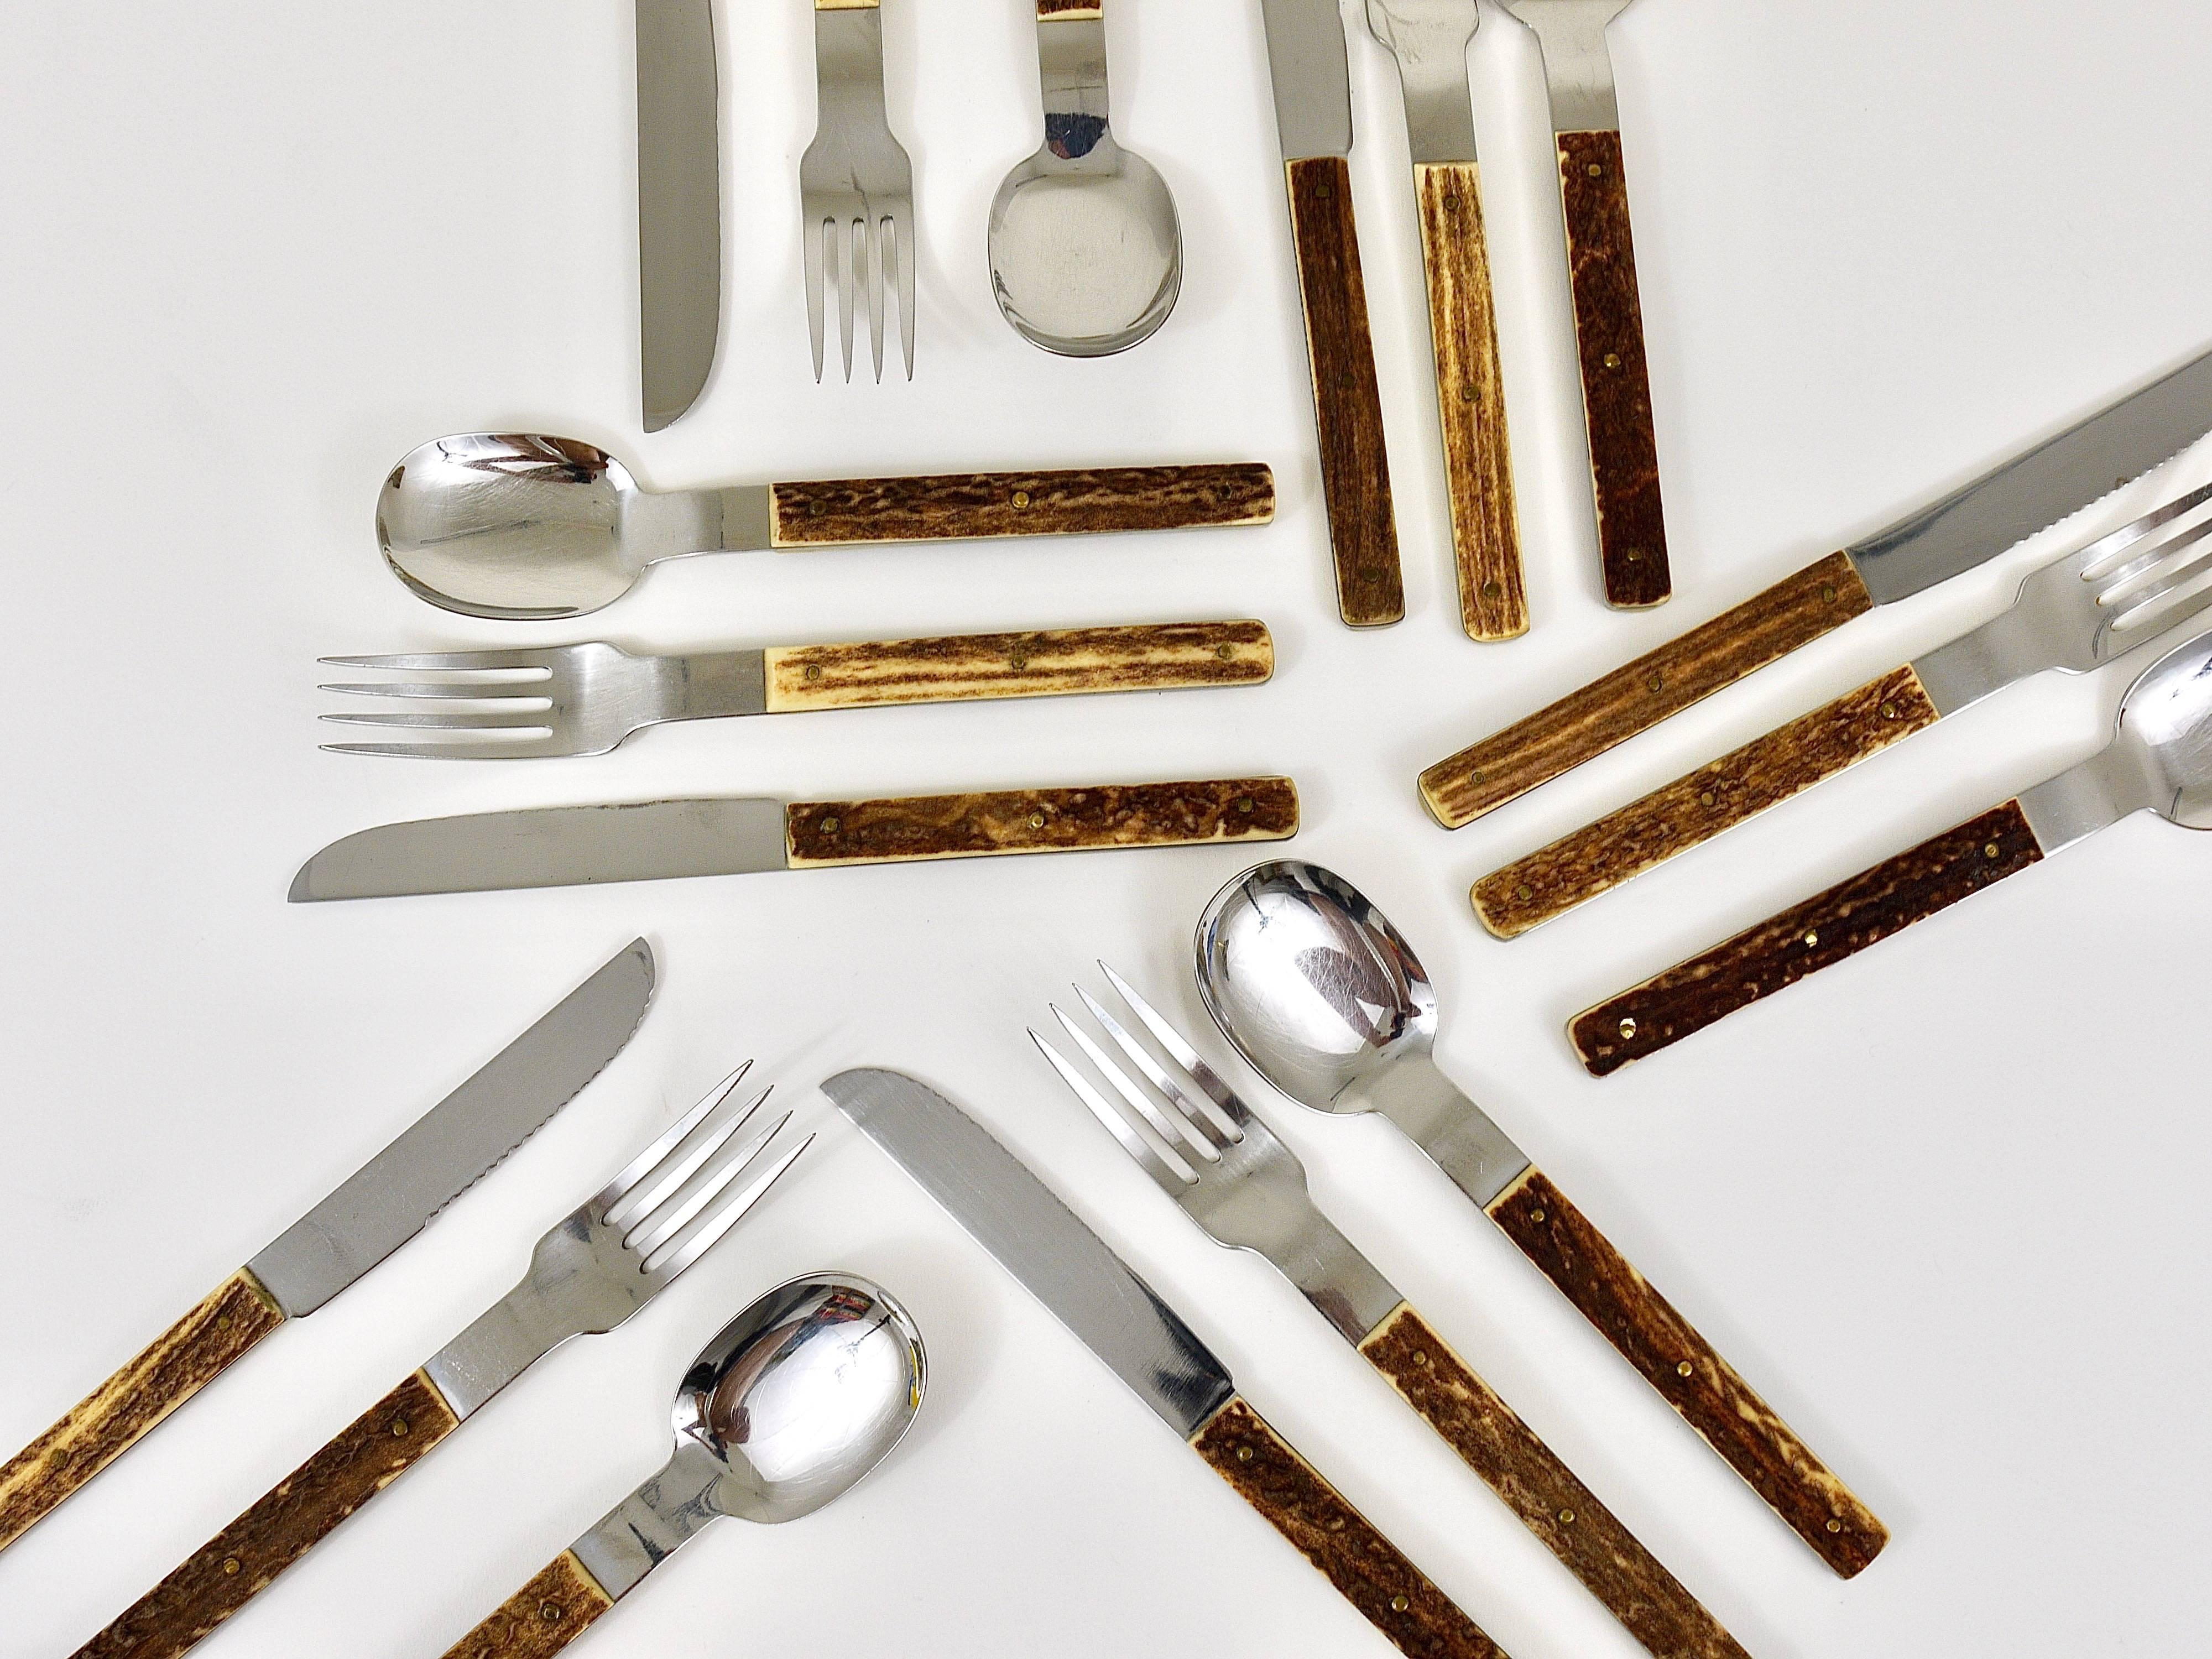 A set of modernist flatware for six persons. Consisting of 18 pieces, spoons, forks and knives. Executed in the 1960s by Amboss Austria. Made of stainless steel with beautiful deer antler handles. In very good condition with marginal signs of age,